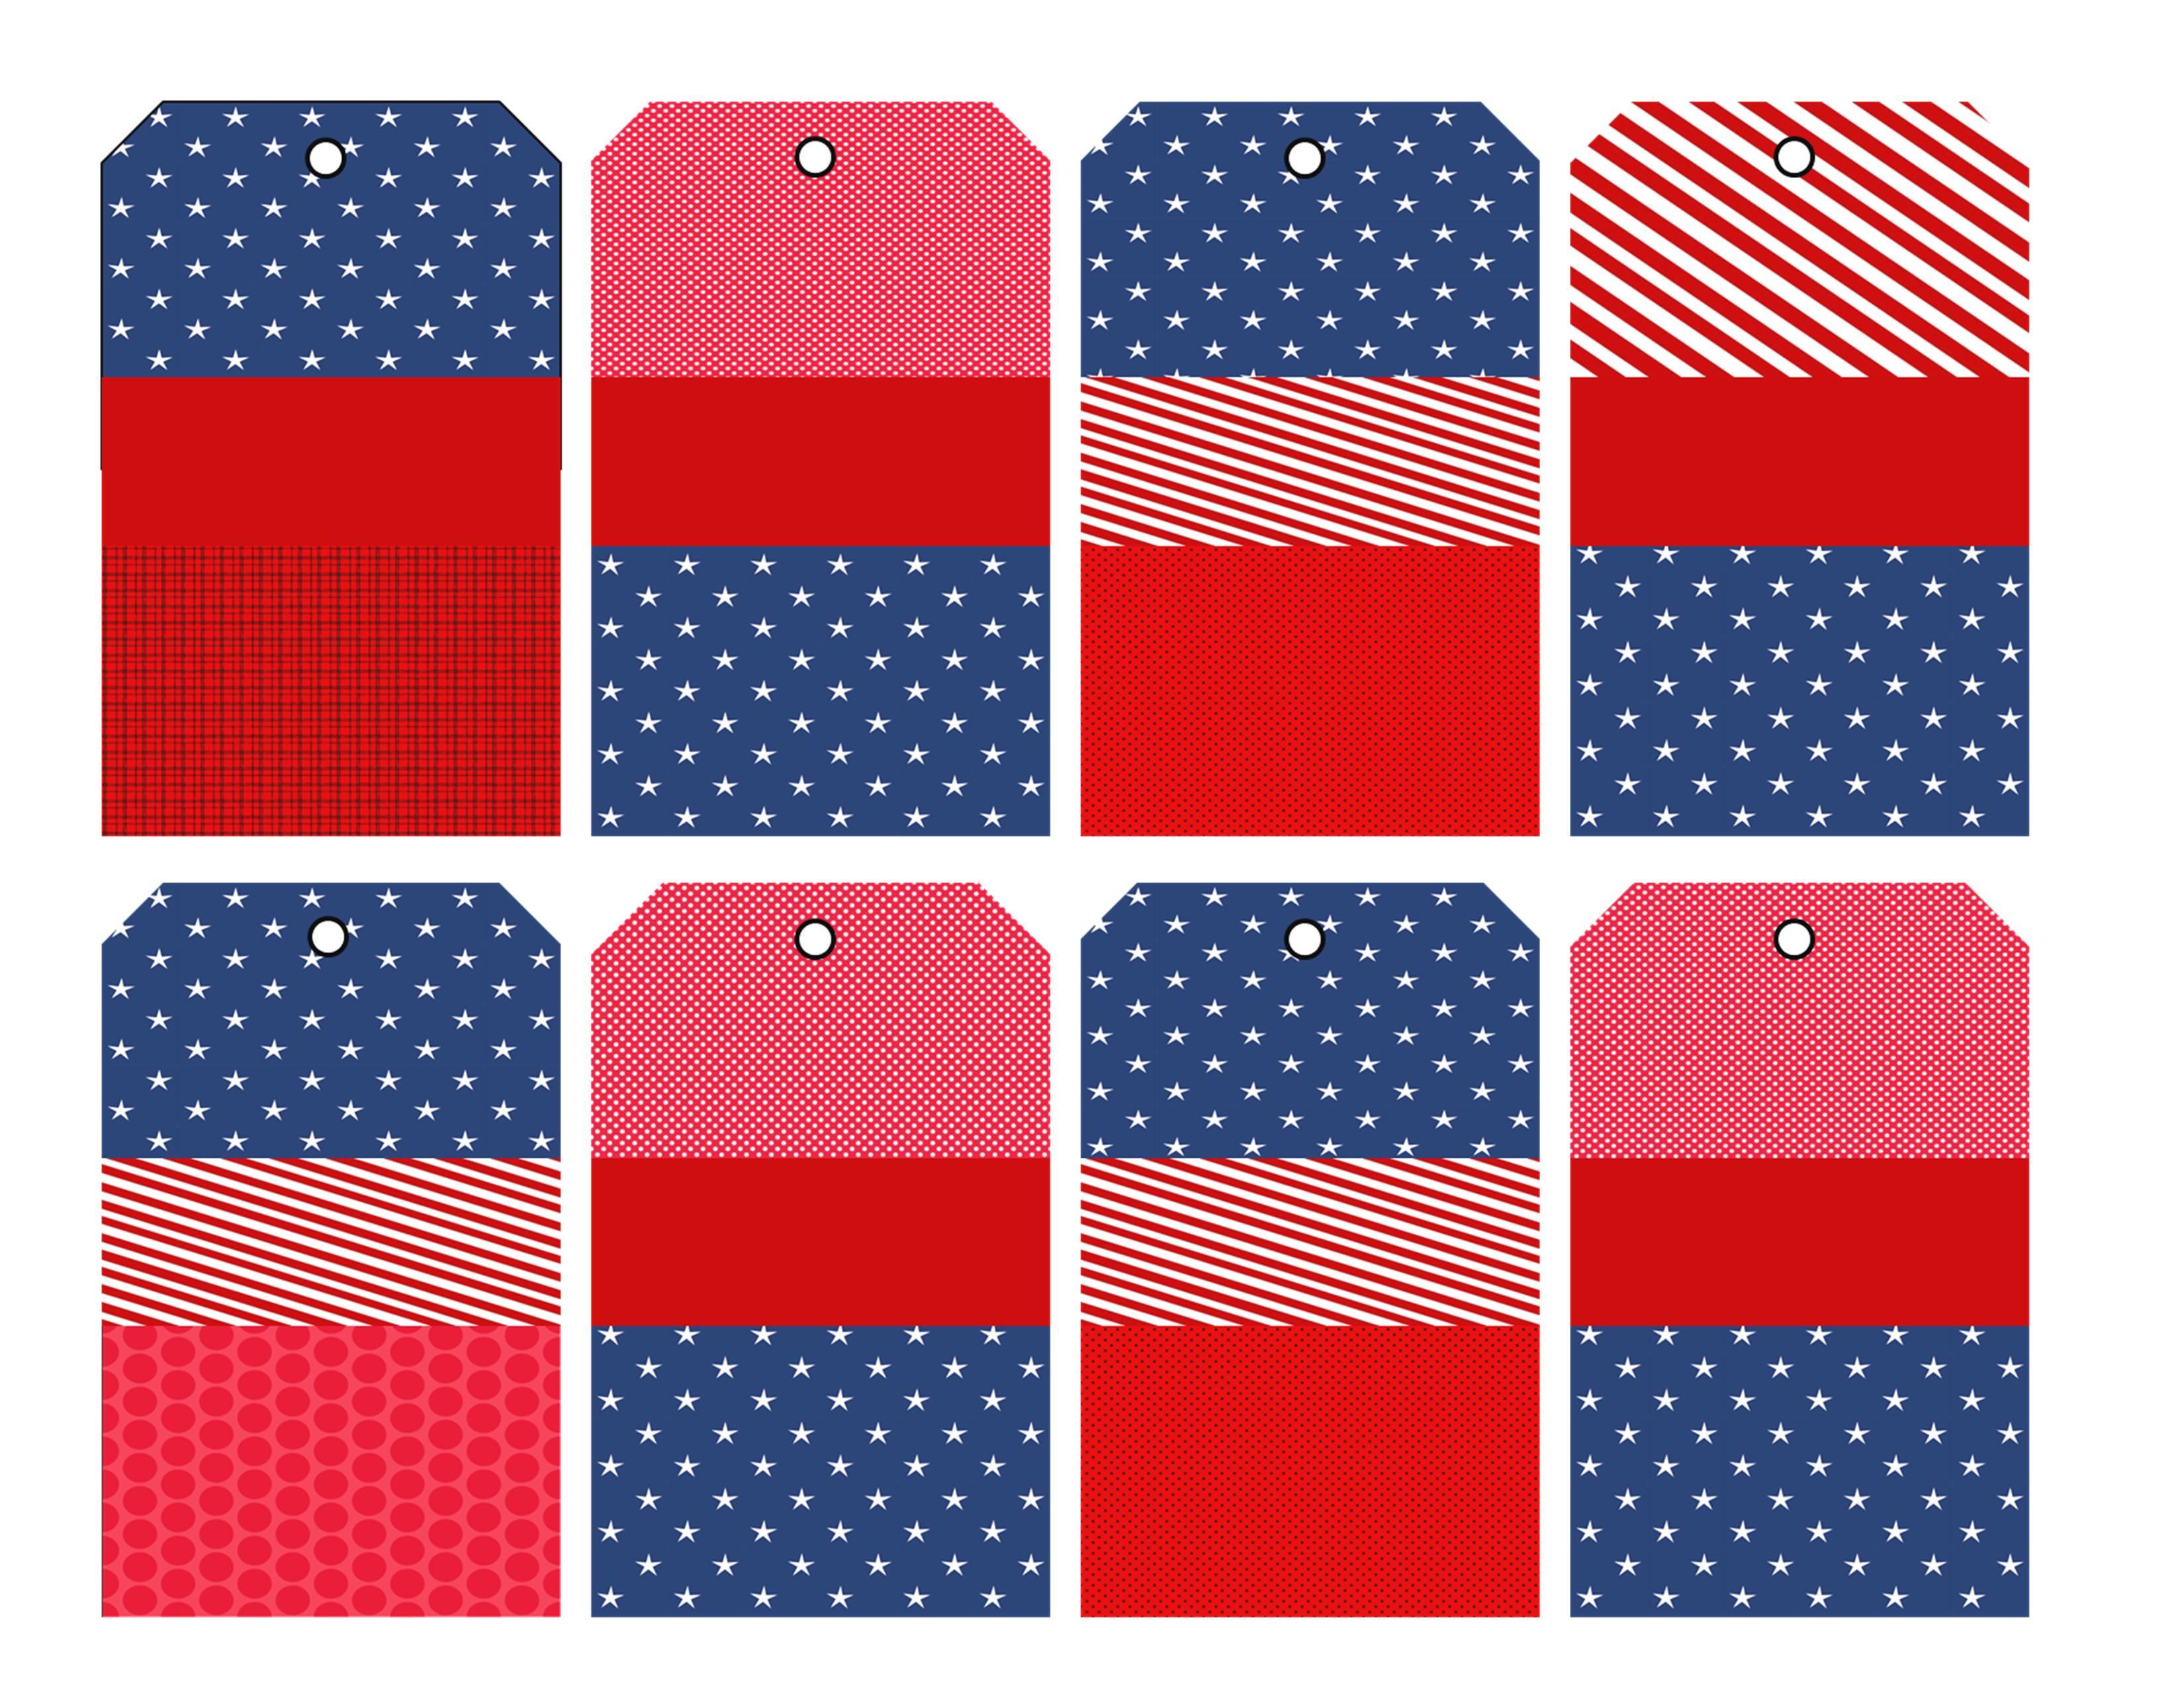 FREE 4th of July Party Printables by Designs by Serendipity Catch My